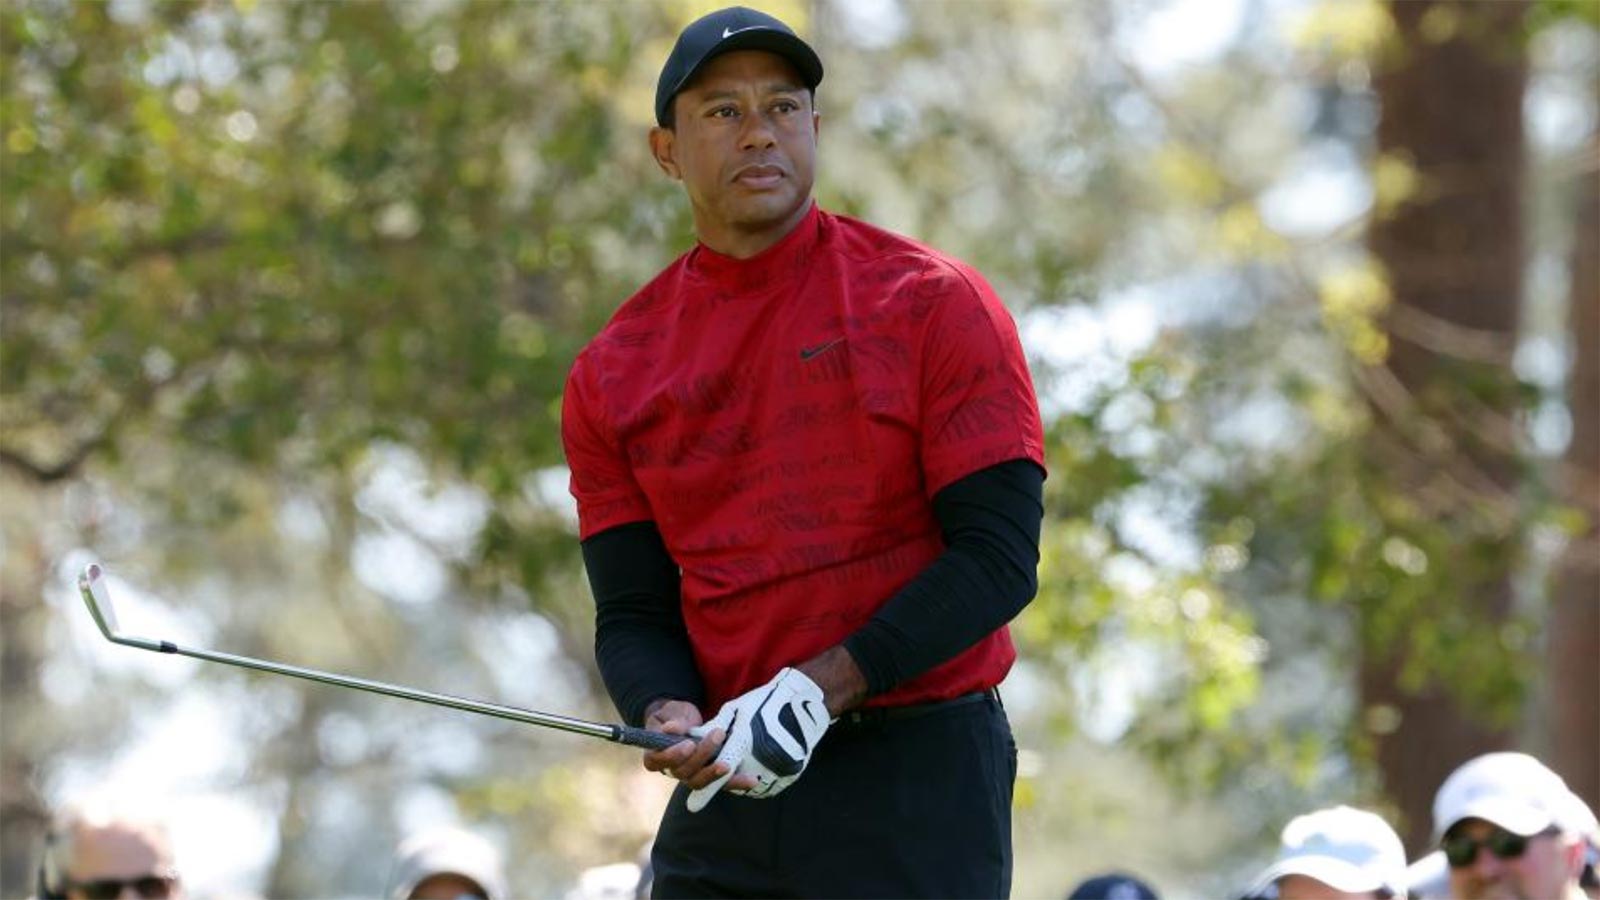 When will Tiger Woods play again and who are the players to watch in